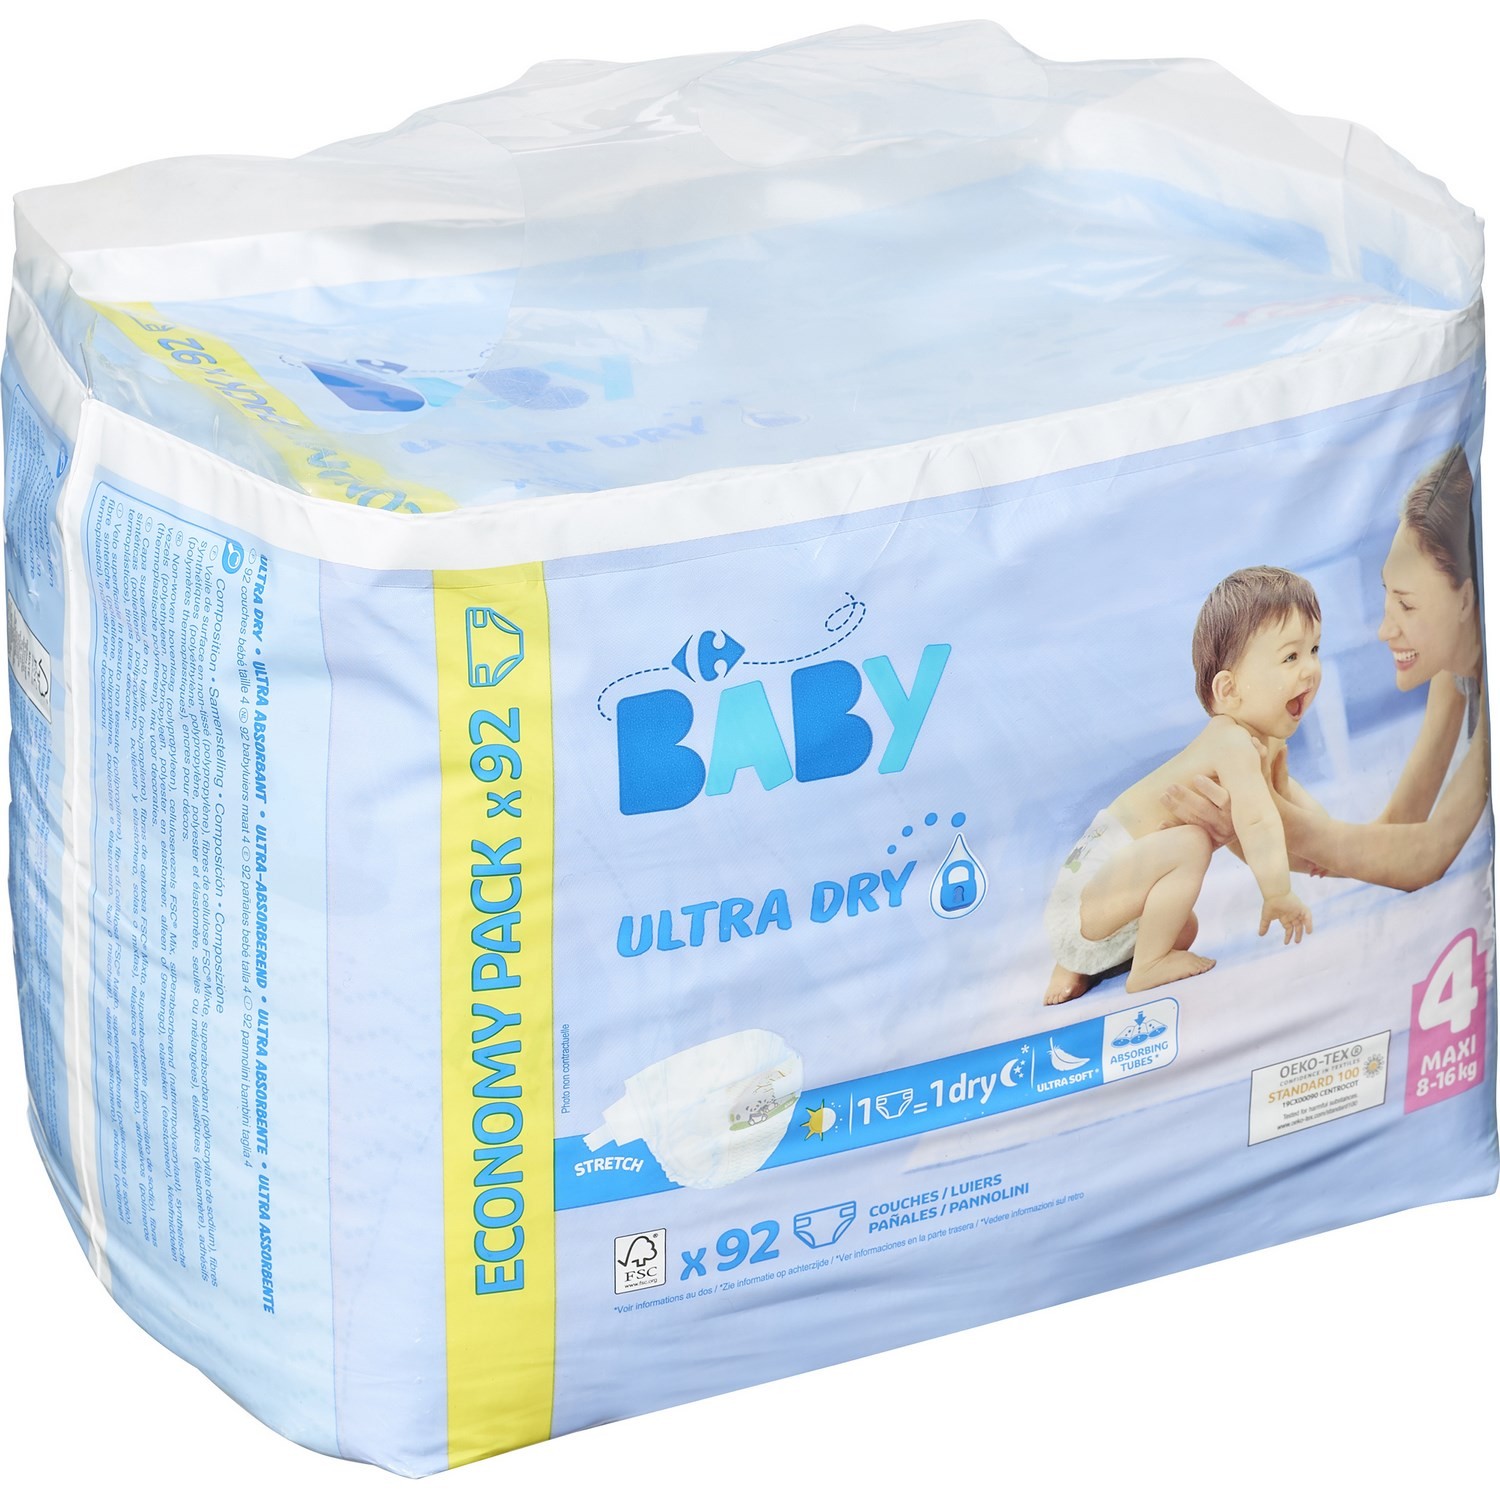 Couches taille 4 maxi : 8-16 kg Ultra Dry CARREFOUR BABY